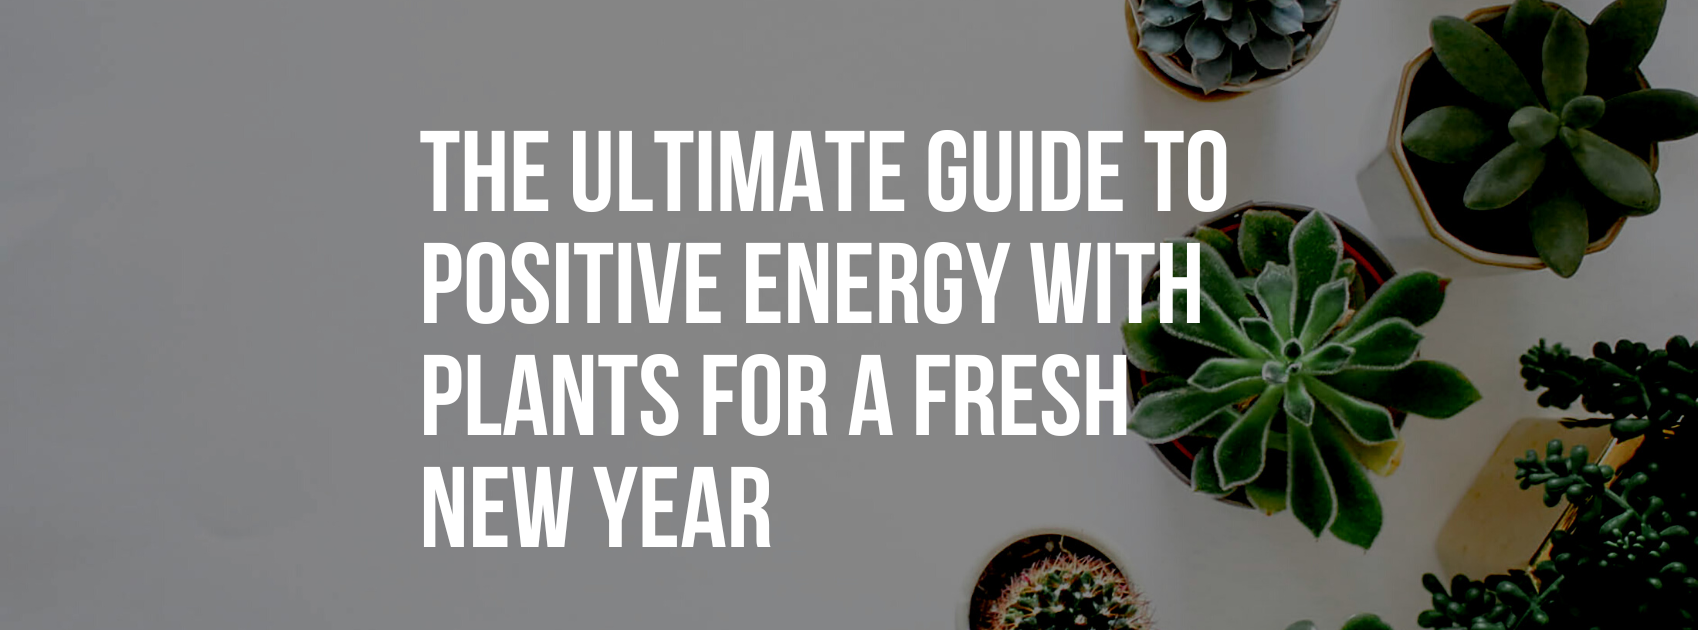 The Ultimate Guide to Positive Energy with Plants for a Fresh New Year